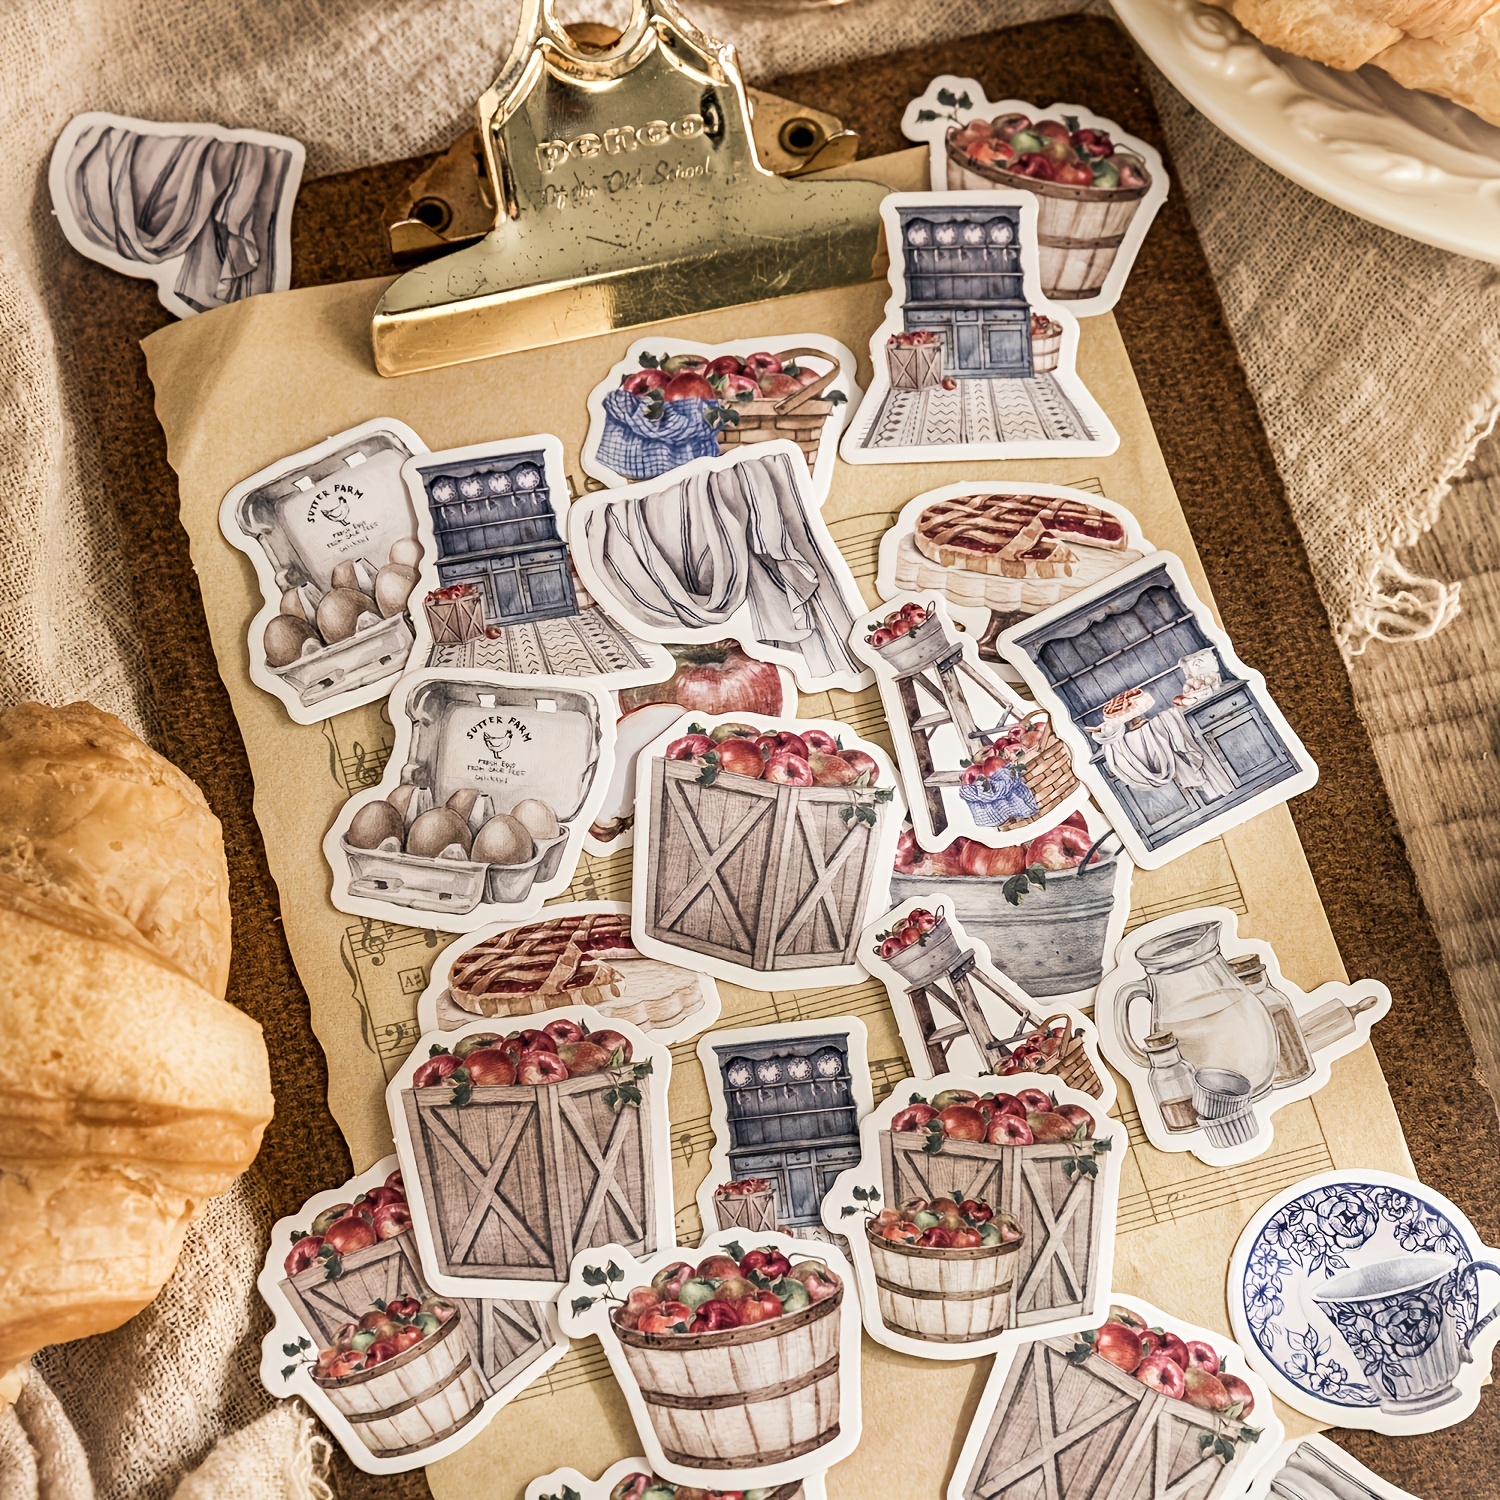 2 Sheets Creative Cartoon Cute Bread Stickers for Scrapbooking DIY  Decorative Material Collage Journaling